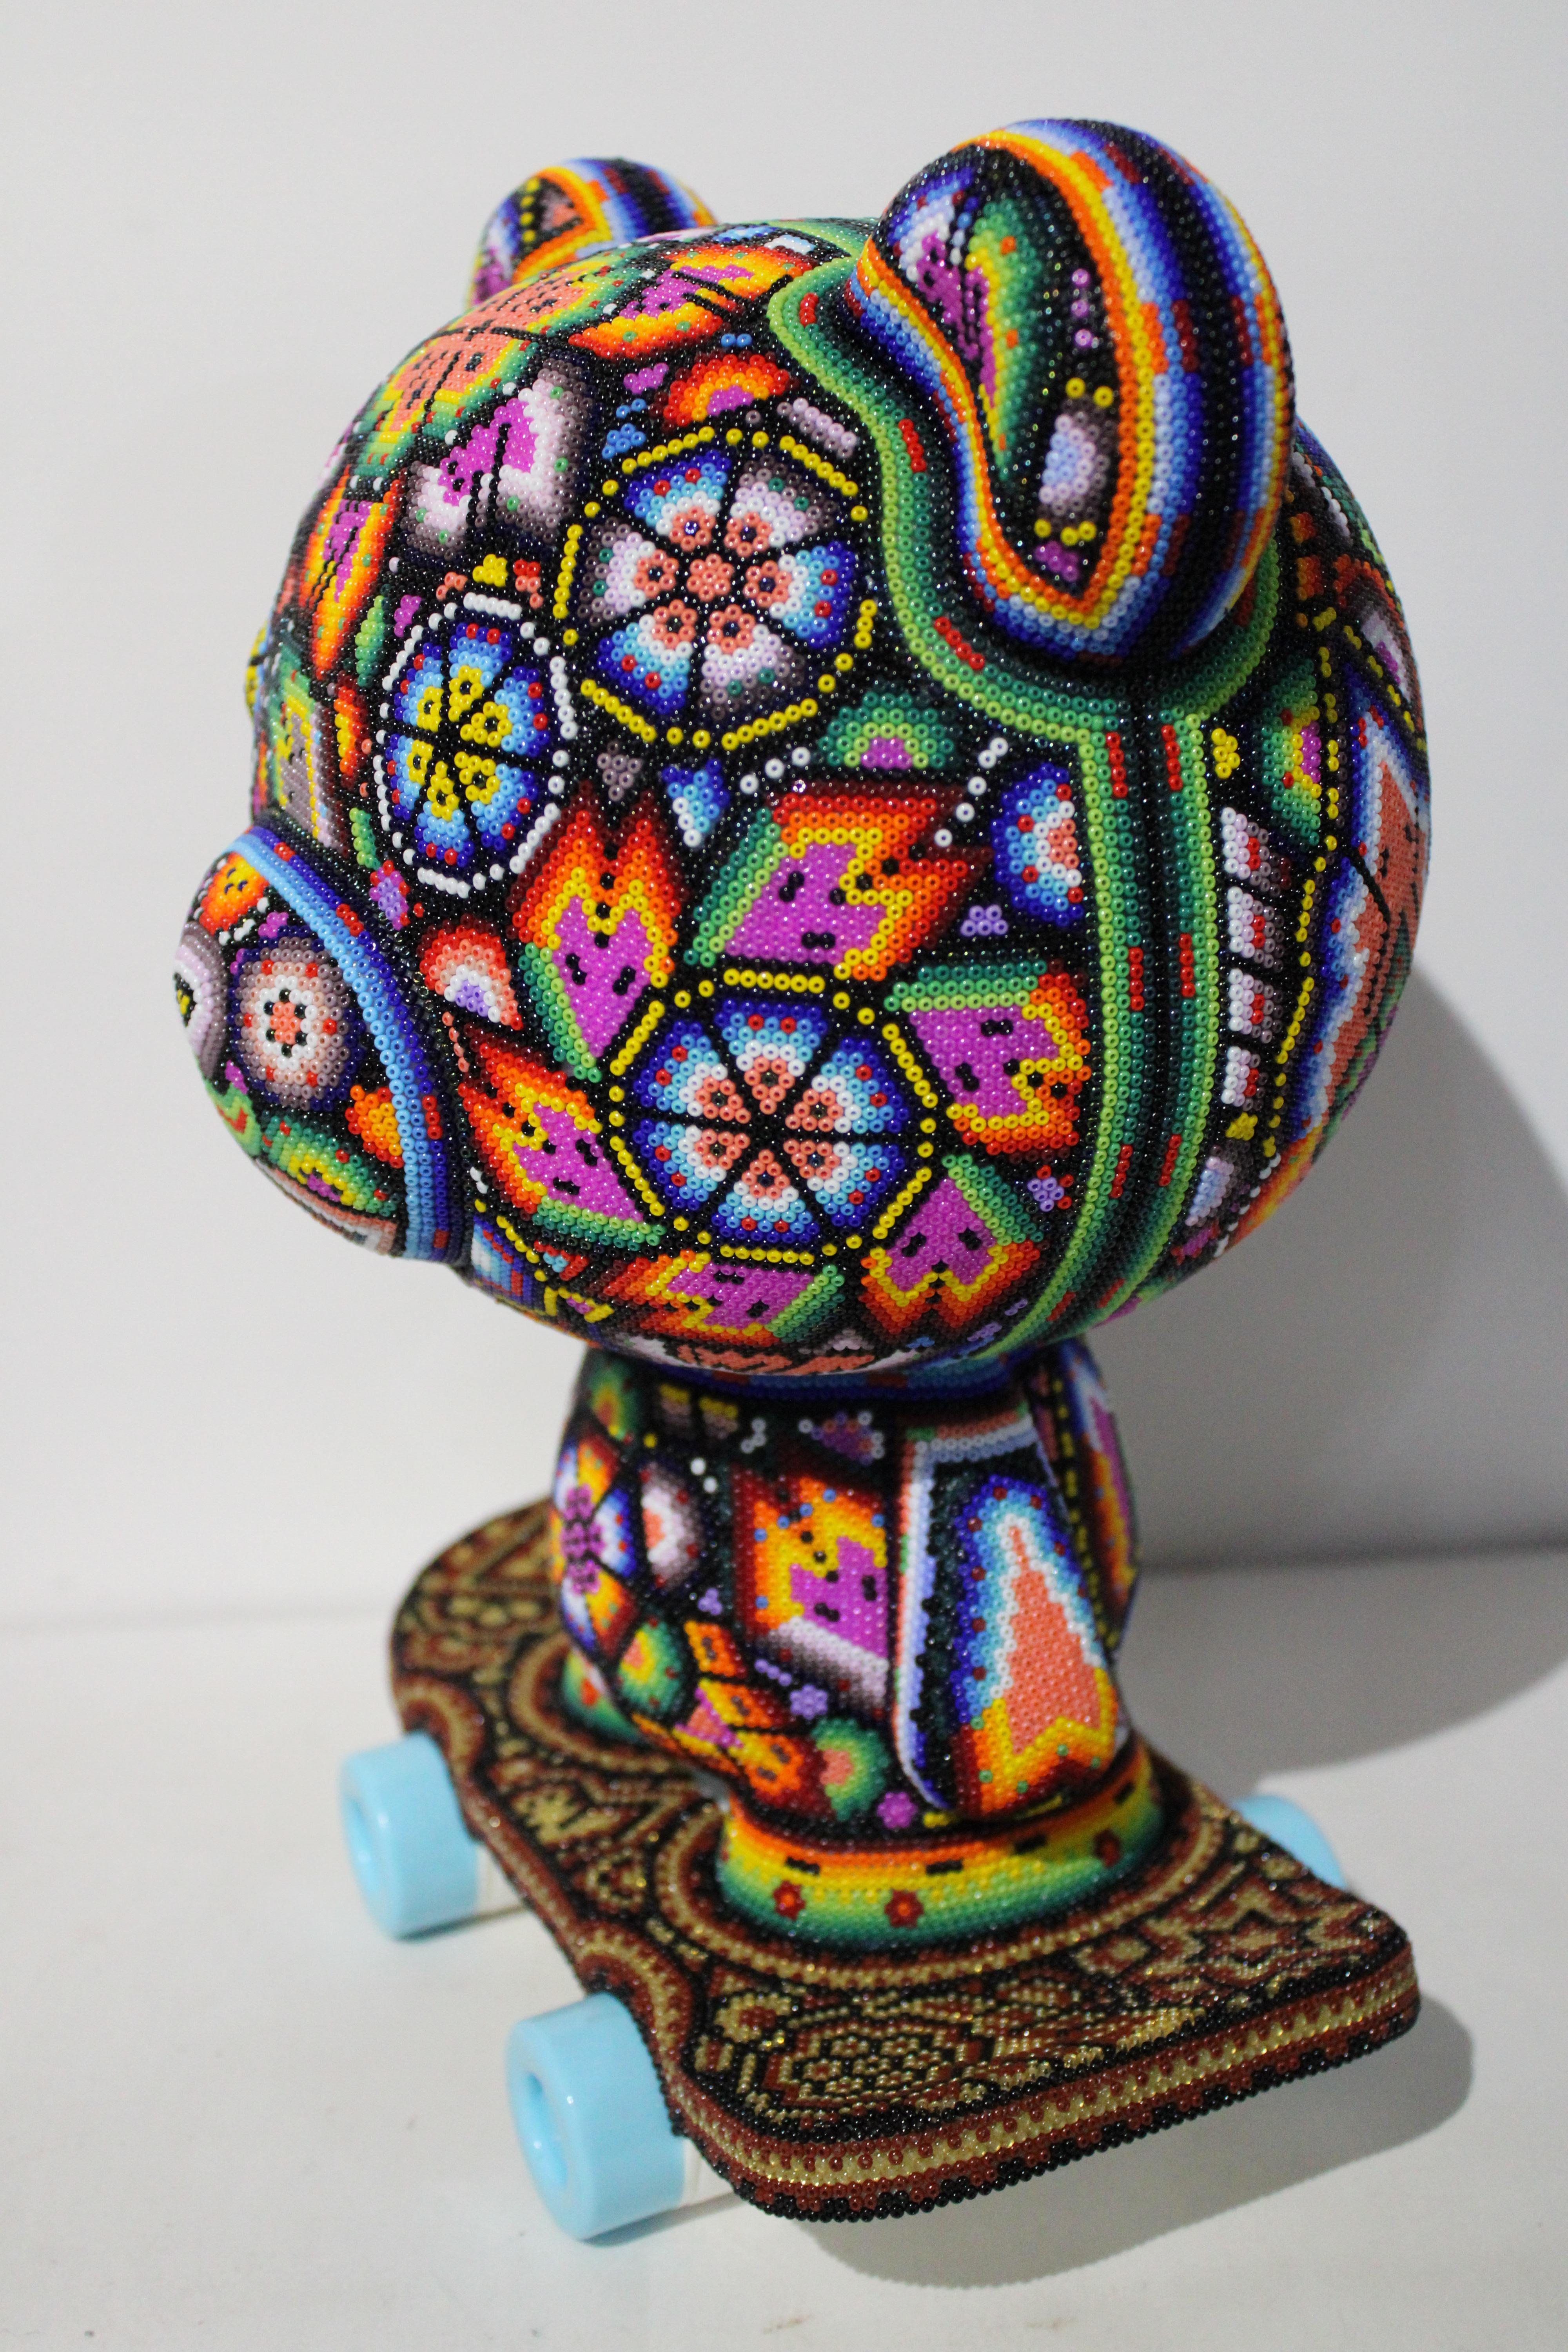 ALTERATION ART . . . is a collaboration process between Rick Wolfryd, fine artist and art dealer with over 40 years experience, and various Mexican Huichol artists and Mexican Huichol art studios that Rick has been drawn to, after 10 plus years of